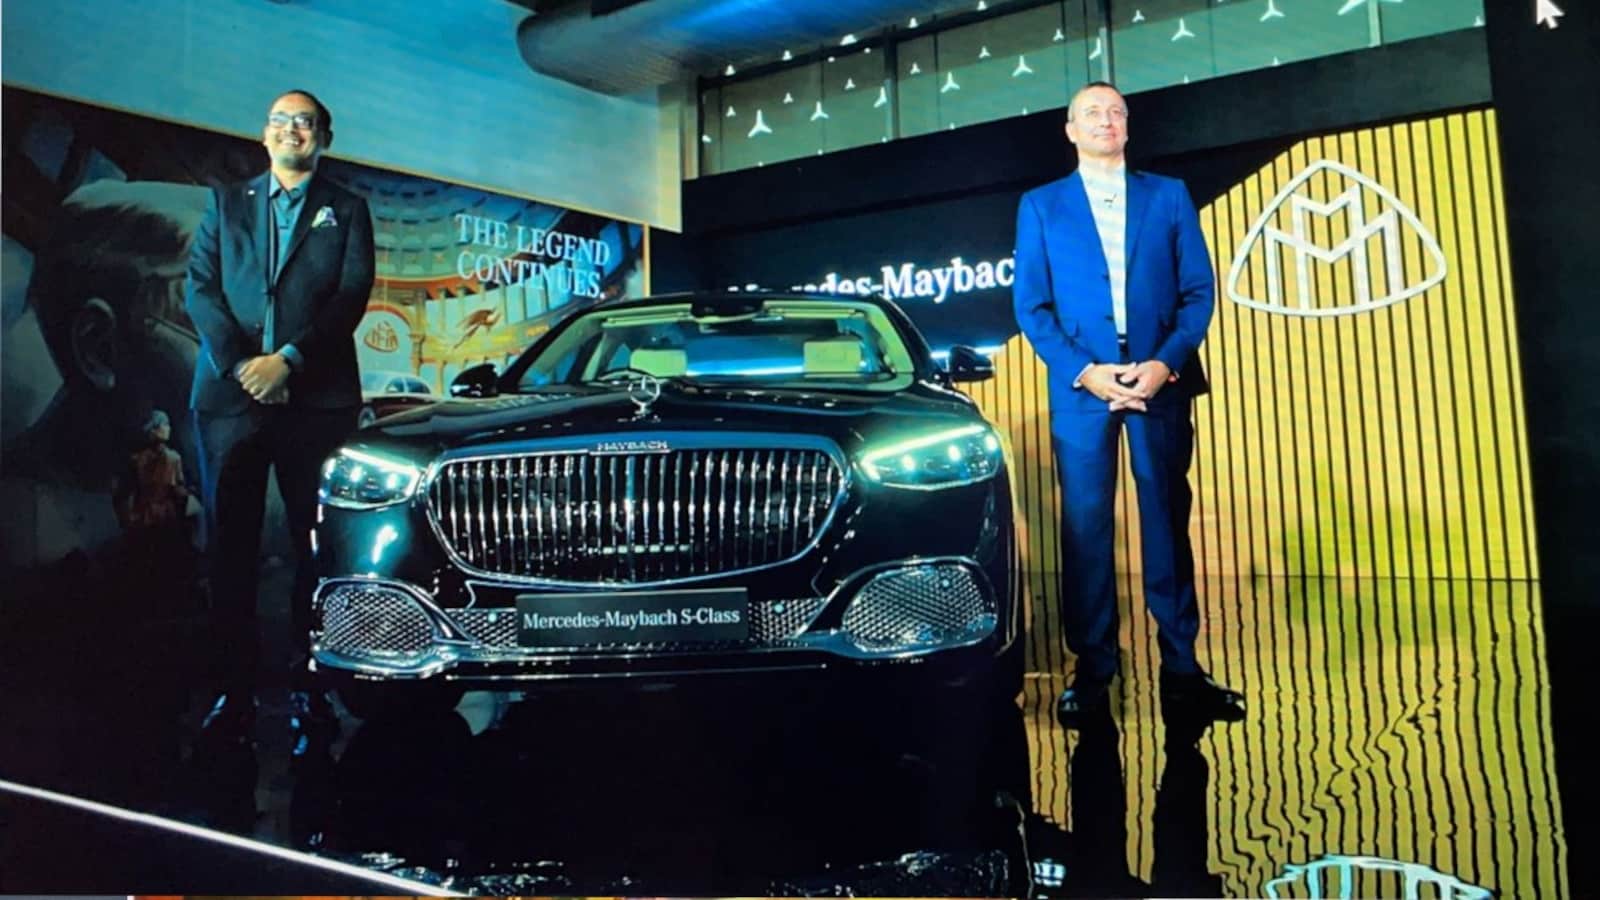 https://images.moneycontrol.com/static-mcnews/2022/03/1-mercedes-maybach-new-sclass.jpg?impolicy=website&width=1600&height=900